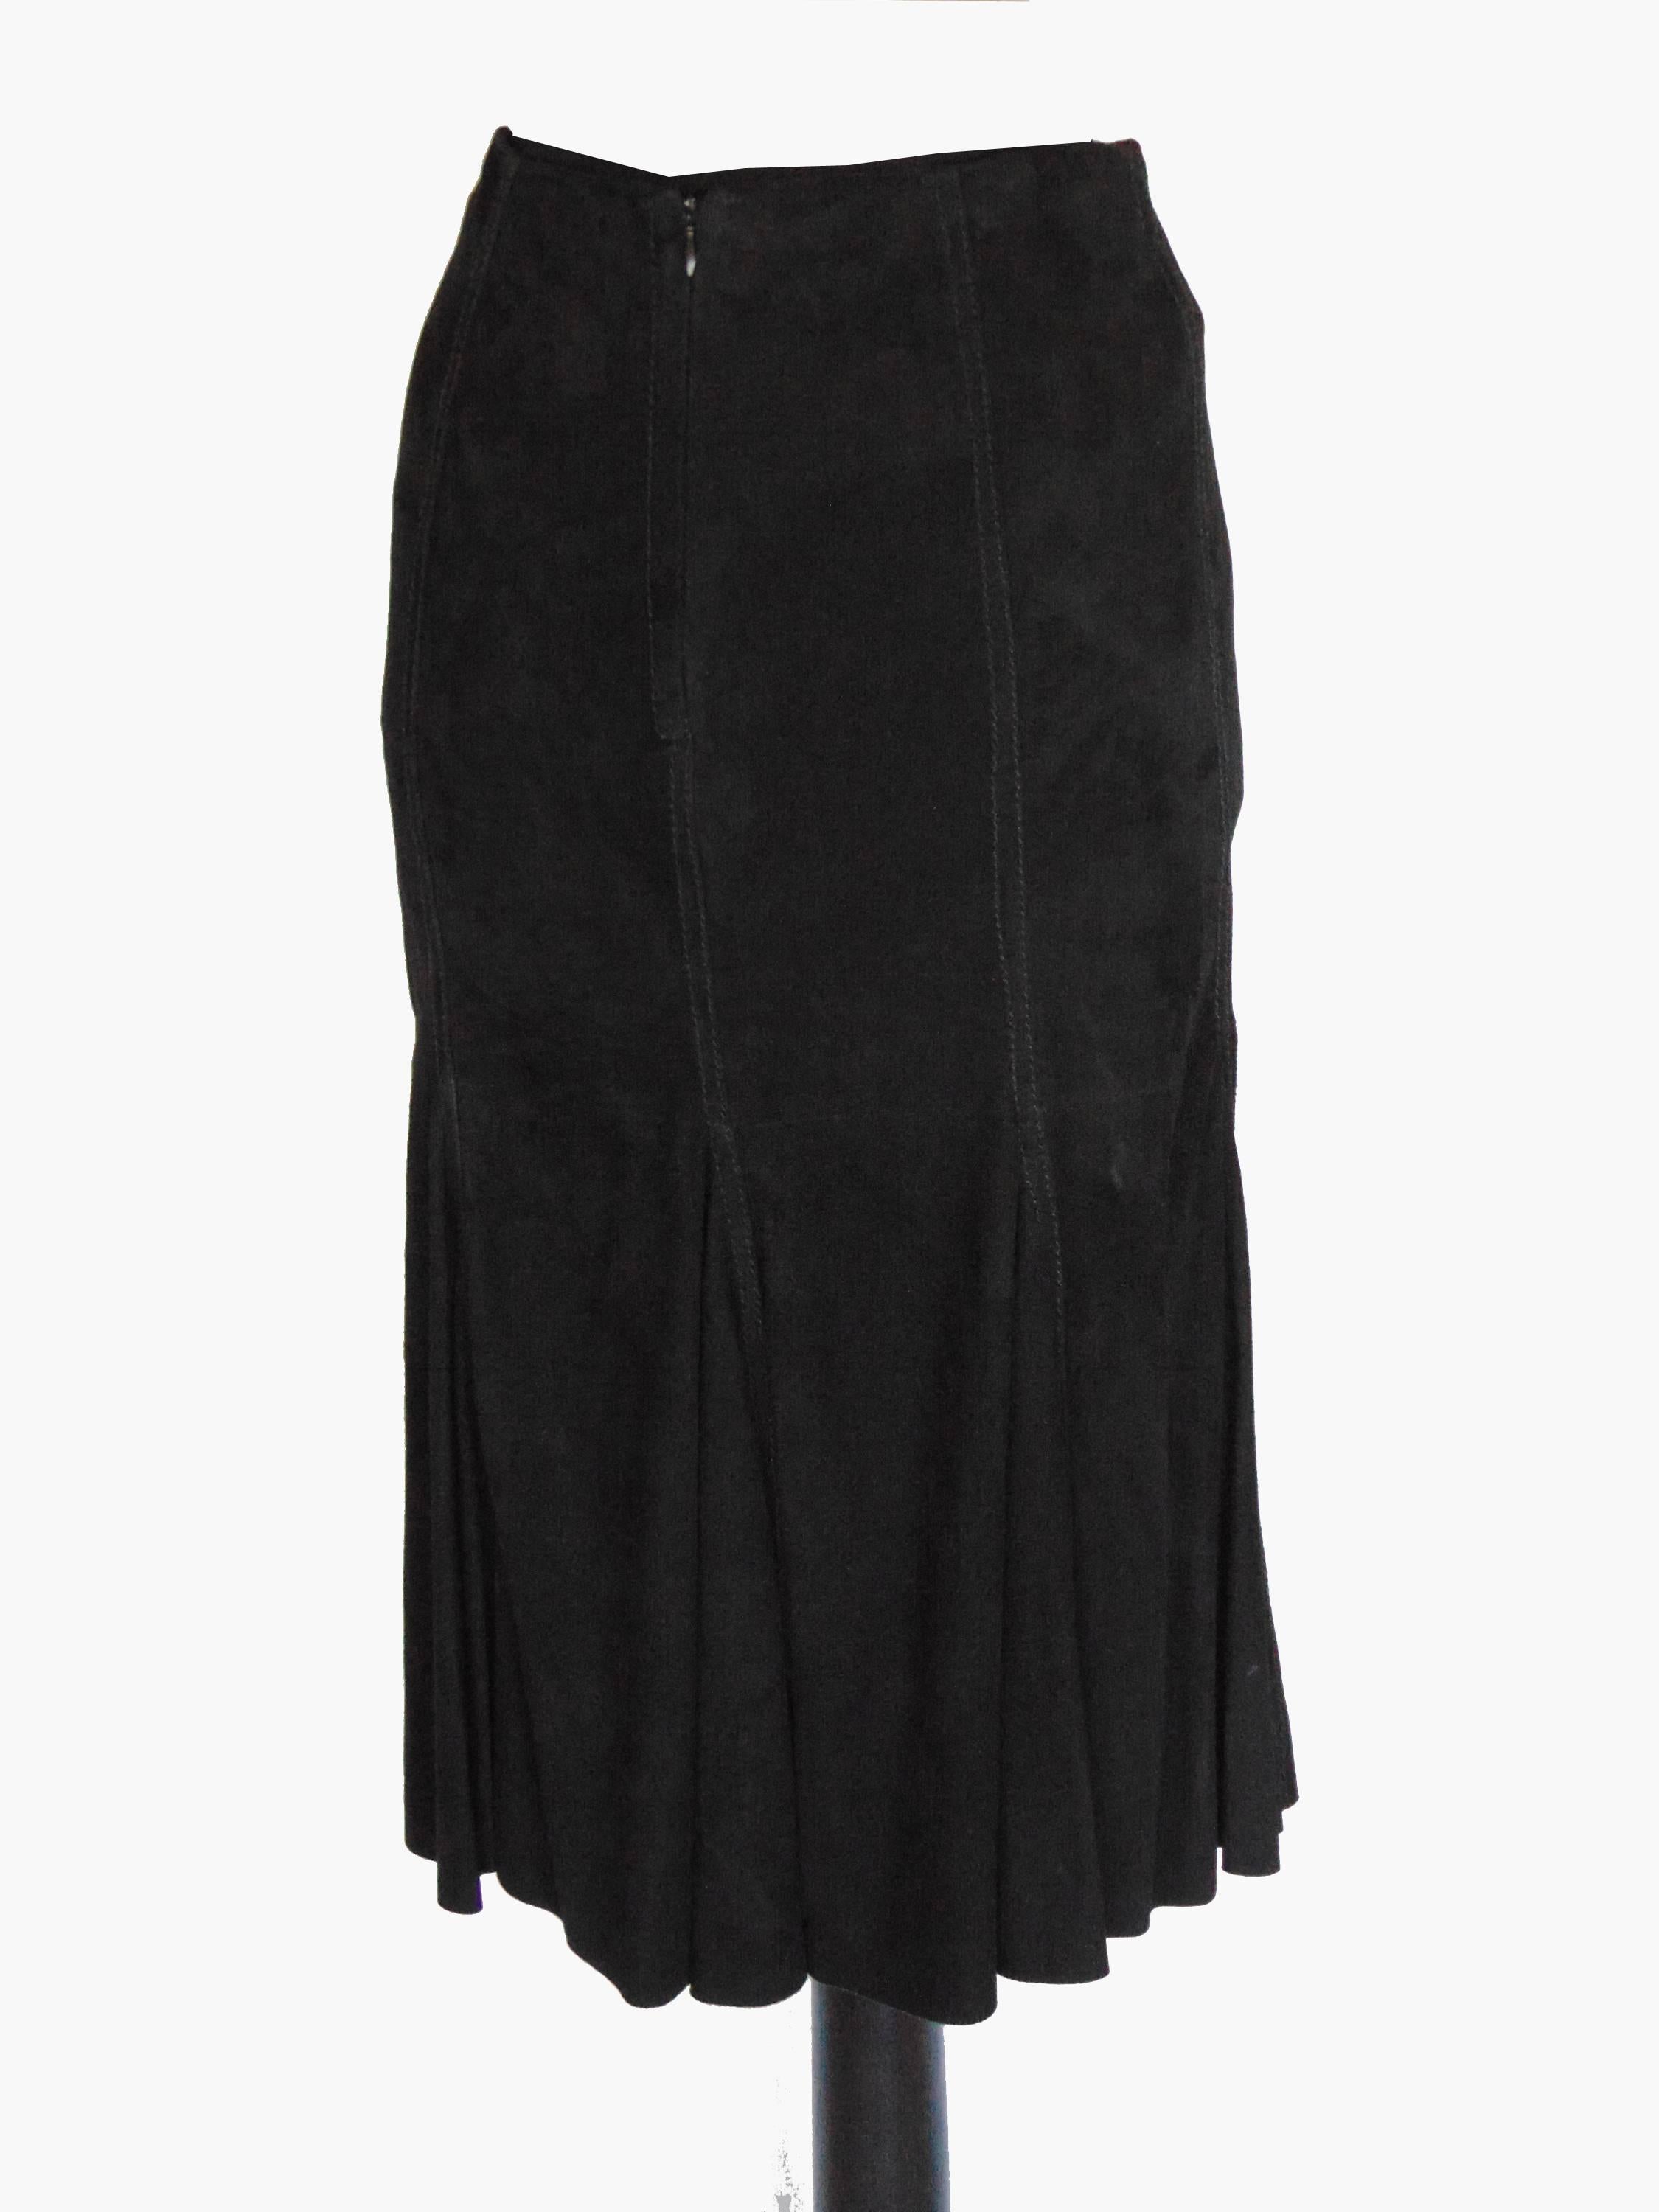 Genny Italy Supple Black Suede Leather Mermaid Skirt 1990s Size S 3